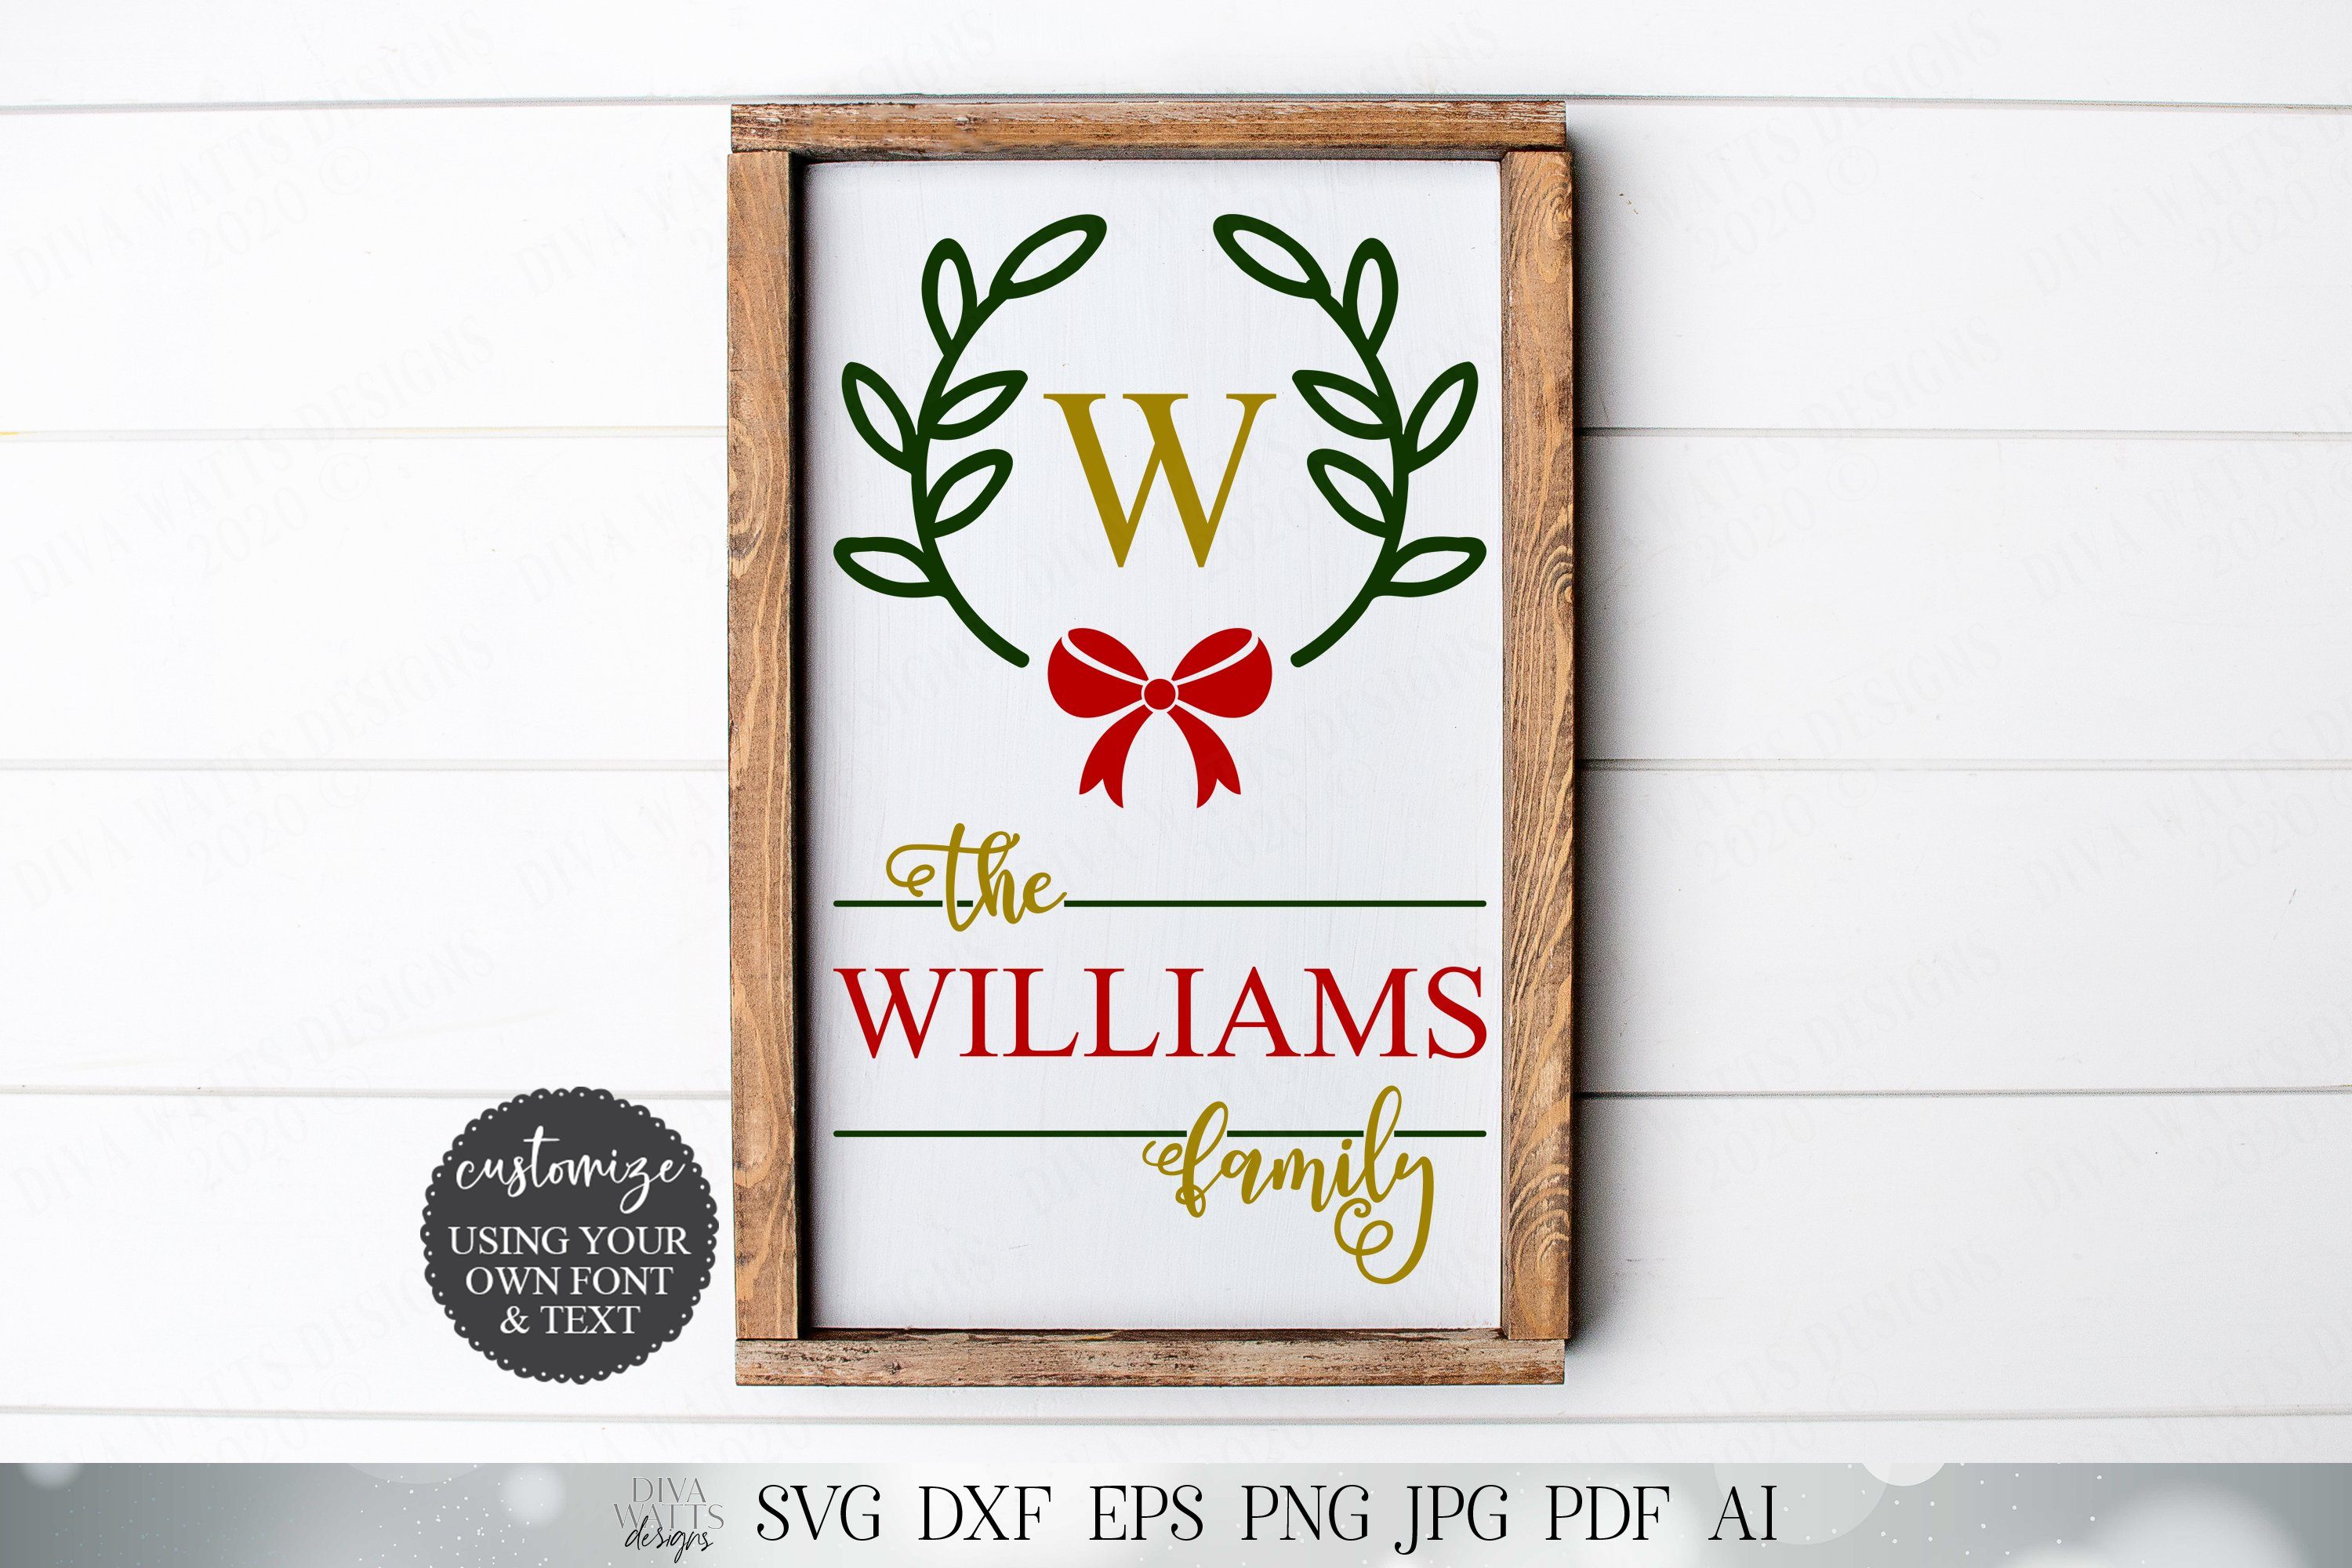 Download Kits How To Cameo Svg D Cricut Last Name Monogram Merry Christmas Cutting File Printing Printmaking